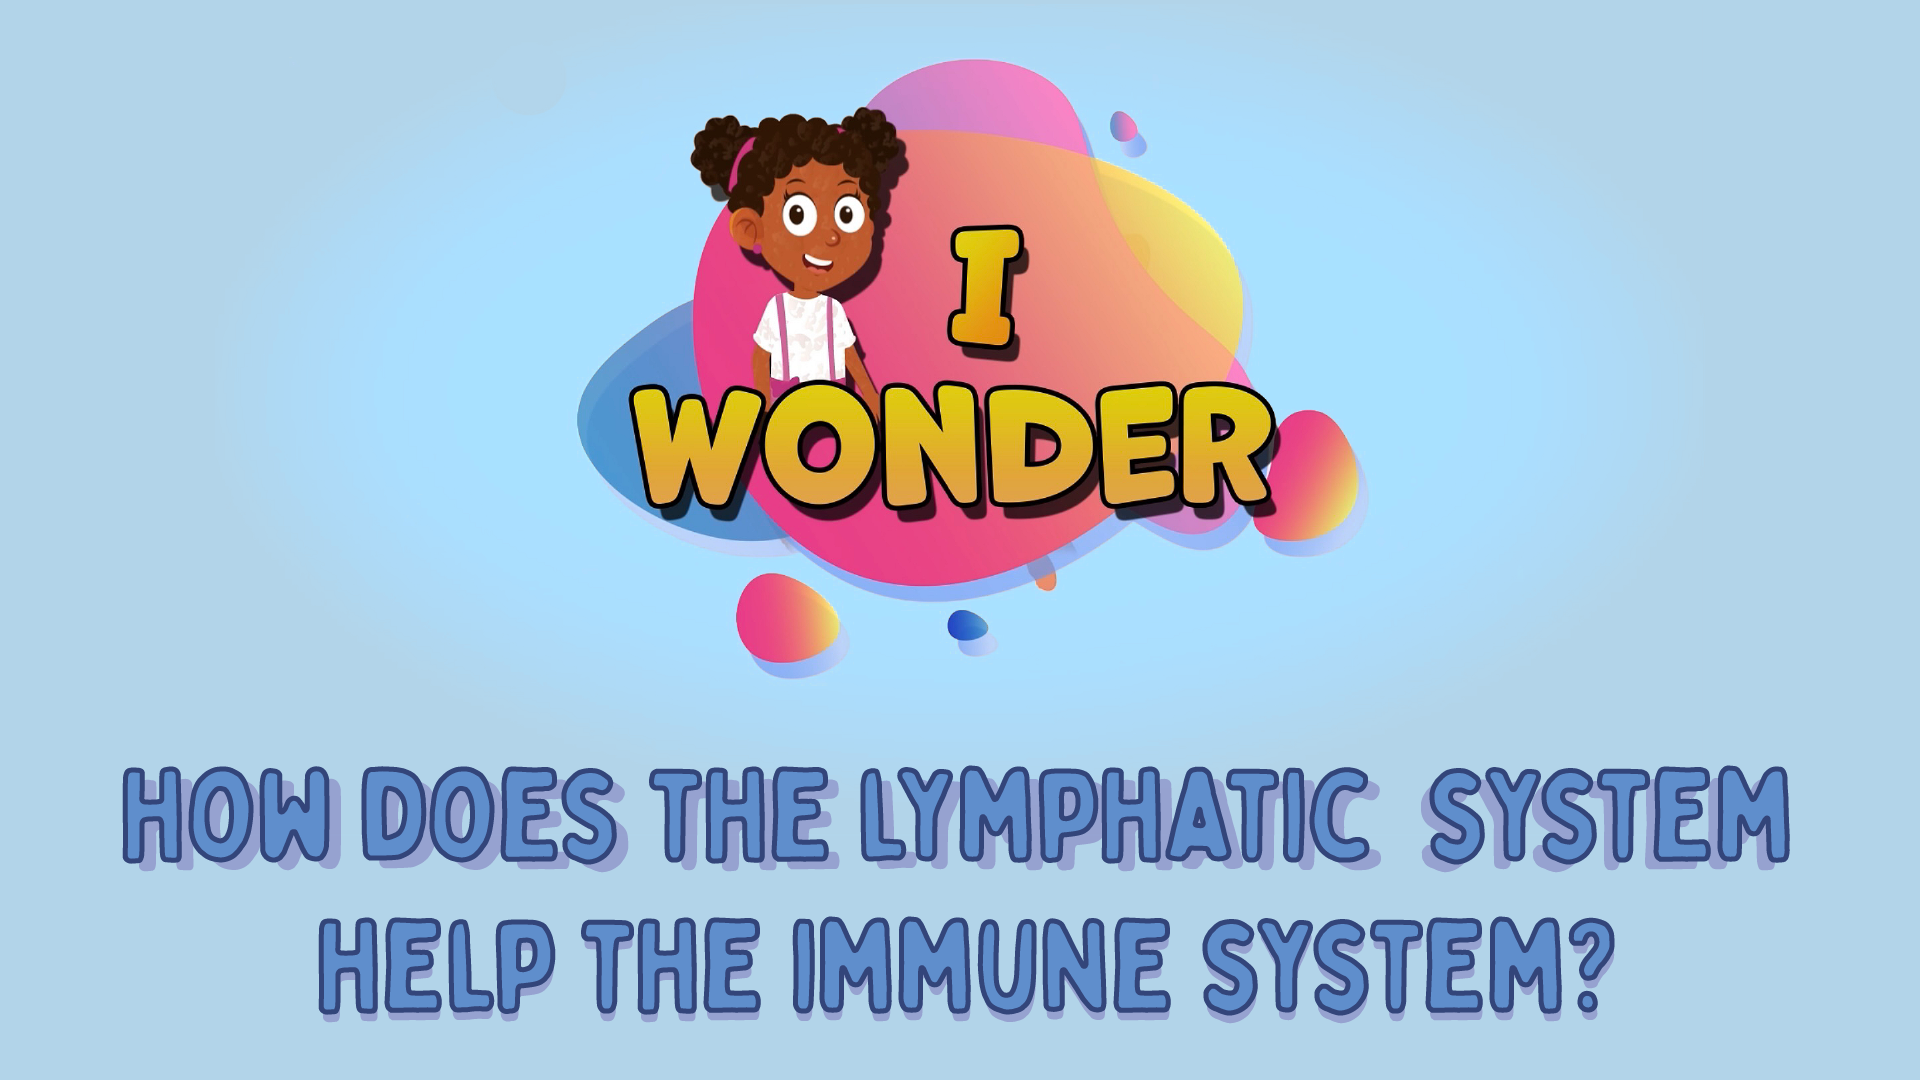 How Does The Lymphatic System Help The Immune System?